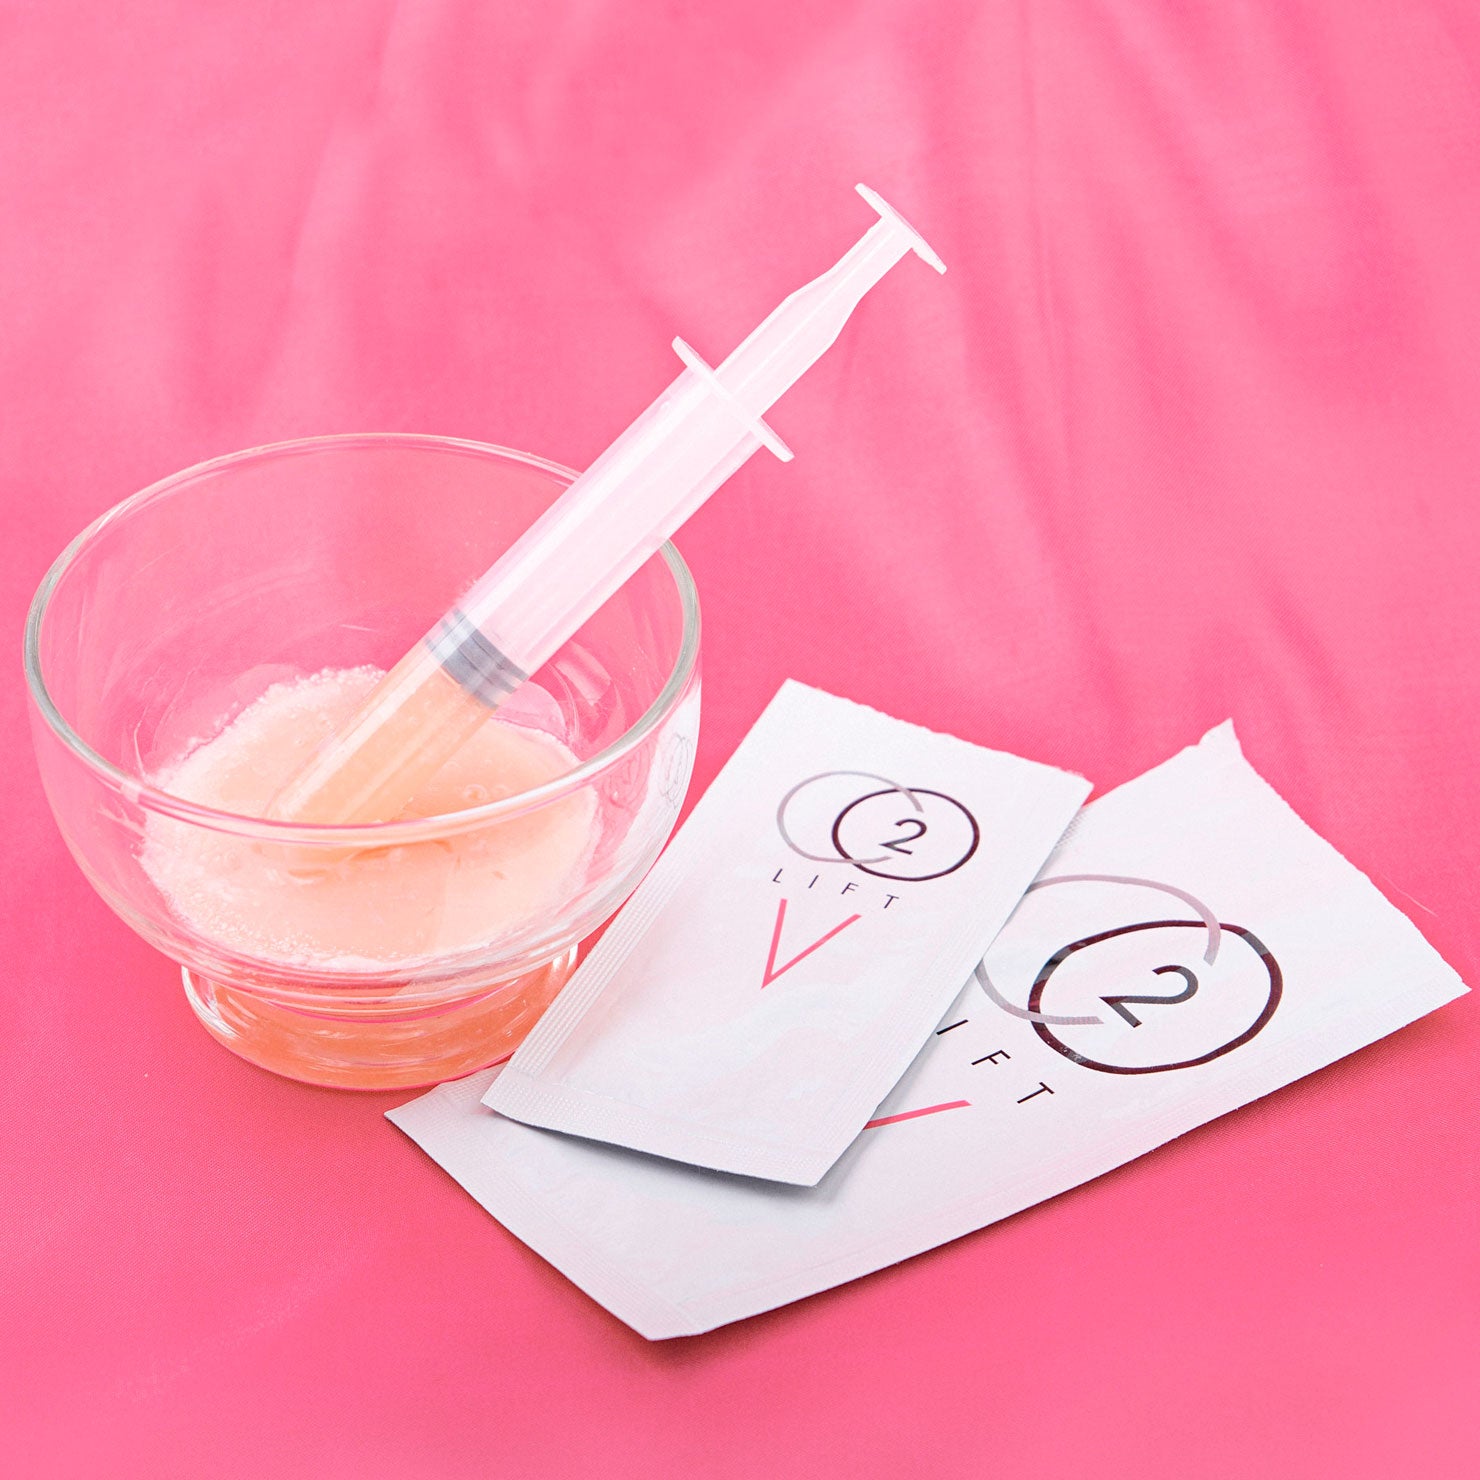 CO2LIFT V®: The At-Home Carboxy Vaginal Treatment